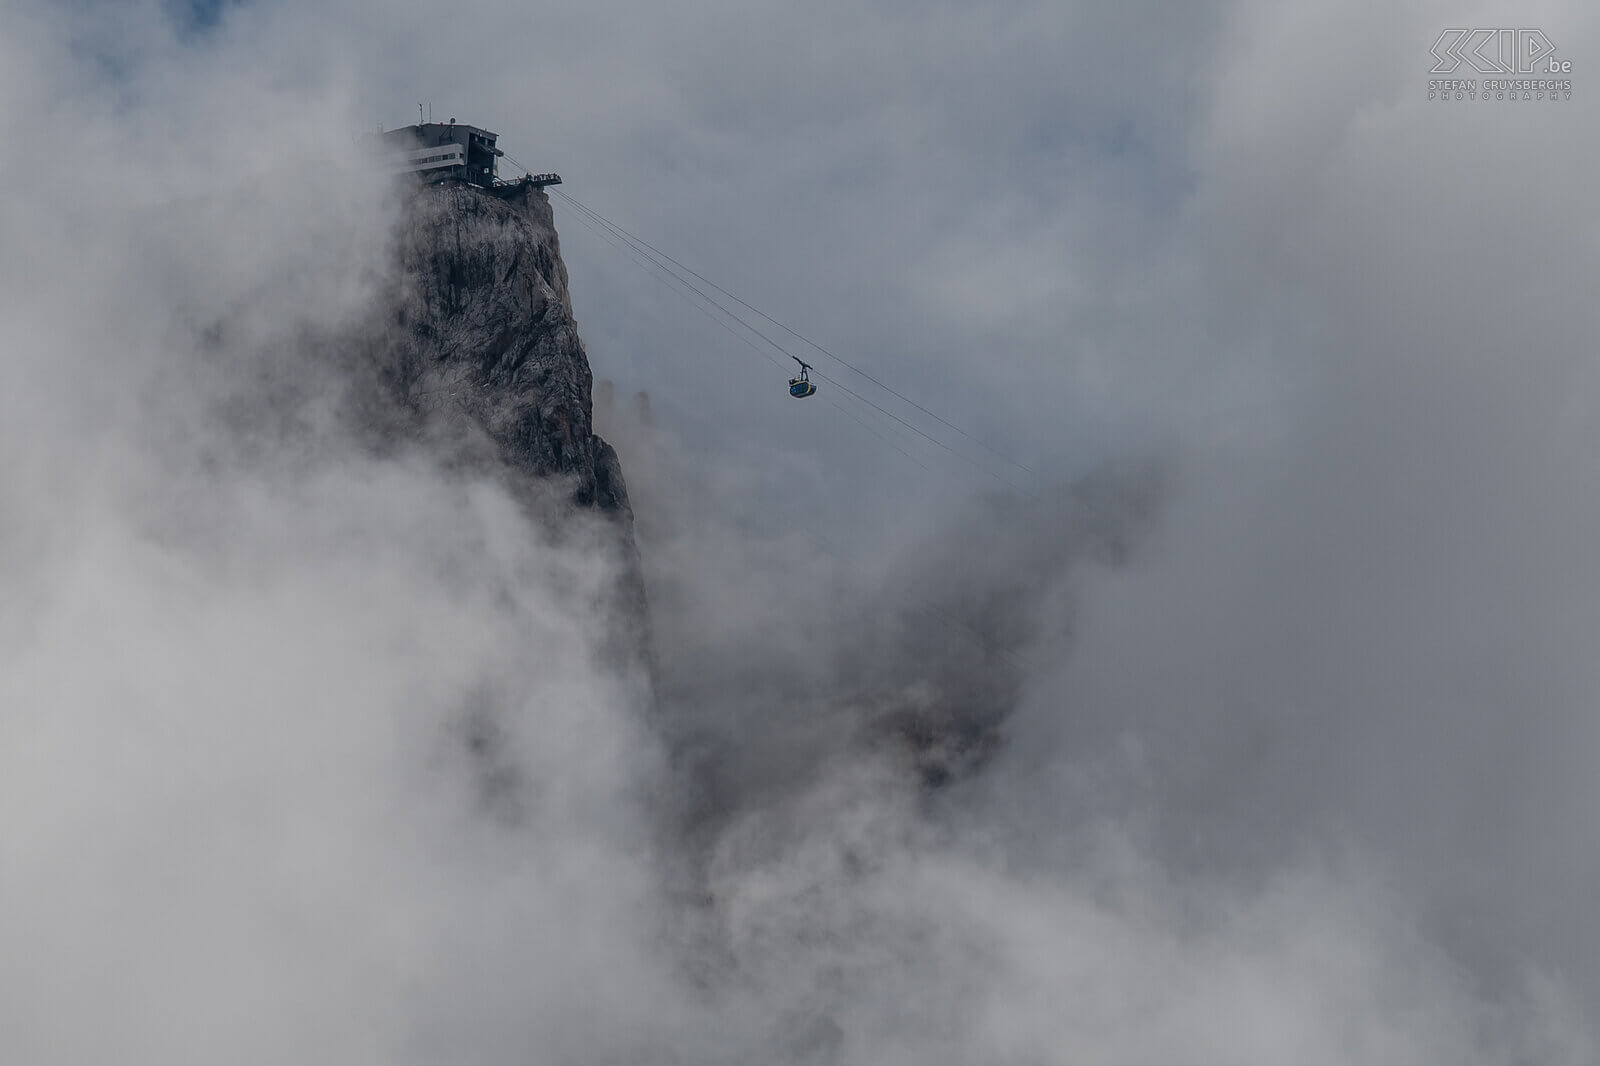 Bachalm - Dachstein glacier The terminal station and a gondola to the Dachstein Glacier in Austria emerge between the clouds. The glacier is located at an altitude of 2700m and a gondola can accommodate 50 people. Stefan Cruysberghs